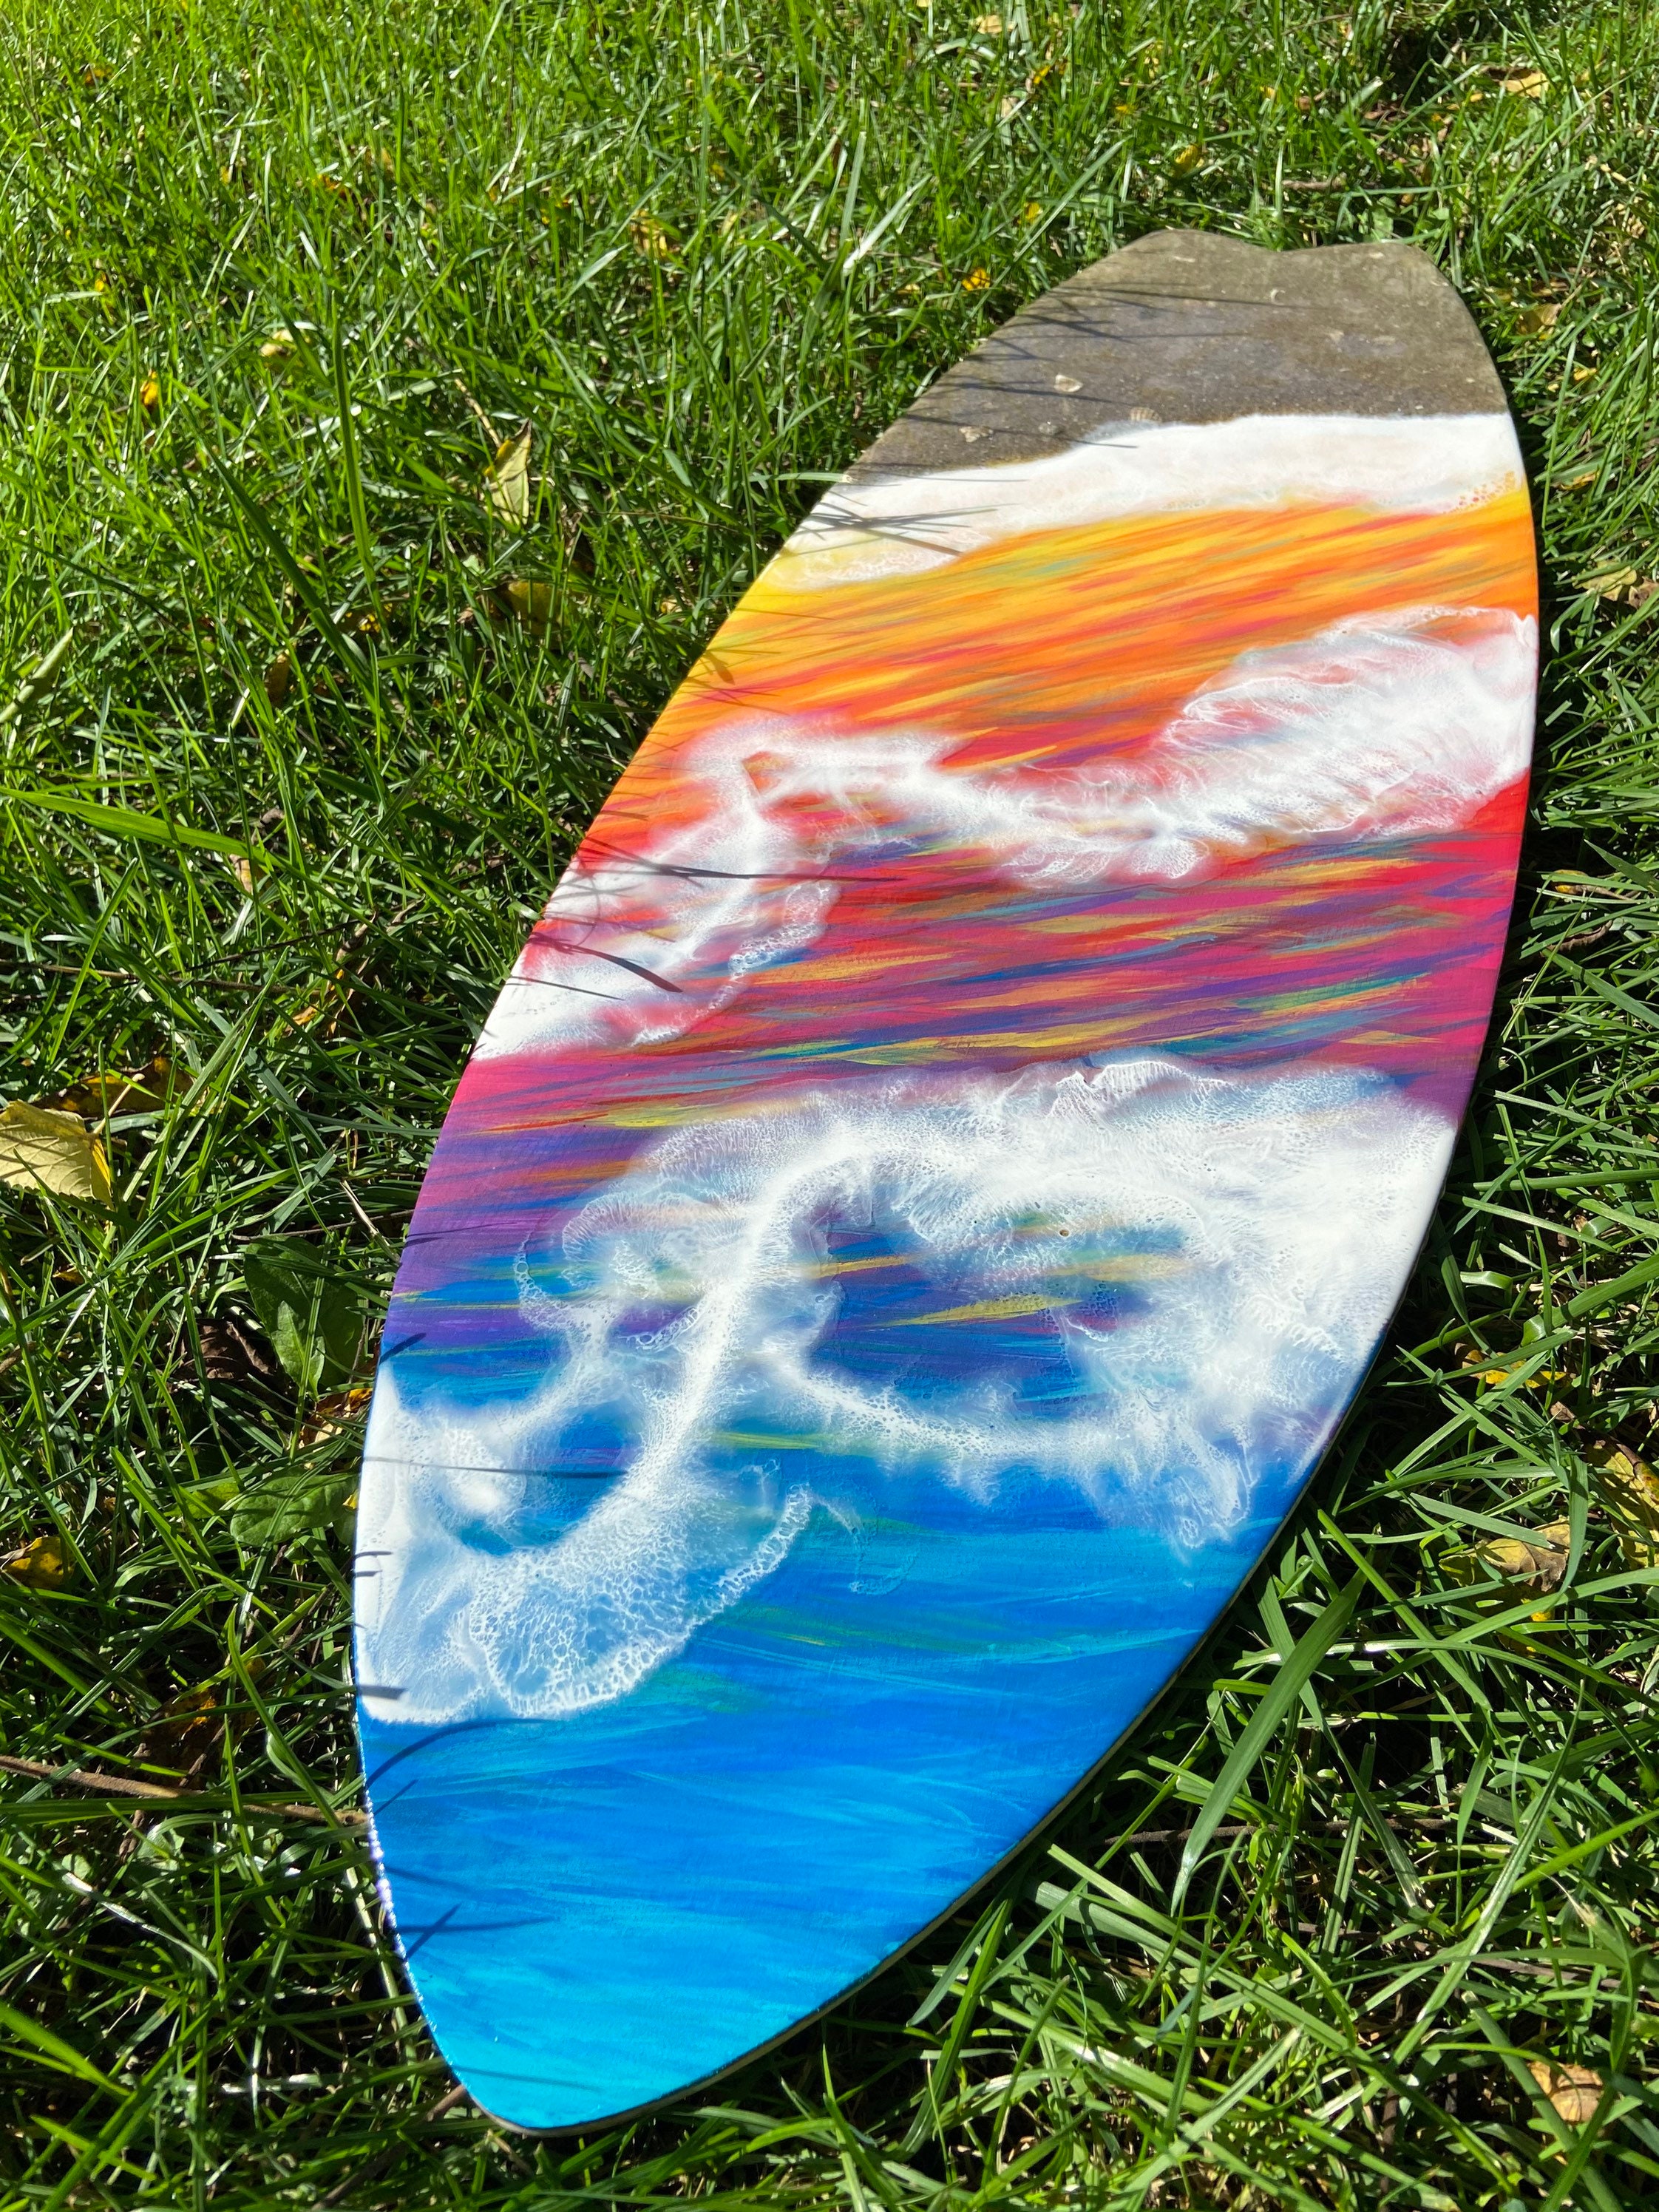 XL 3 Foot Surfboard Paint Colorful Sunset Beach Ocean Waves Inspired Epoxy  Resin Art With Sand Extra Large Wood Wall Decor Gift Idea 36 X 11 - Etsy  Norway